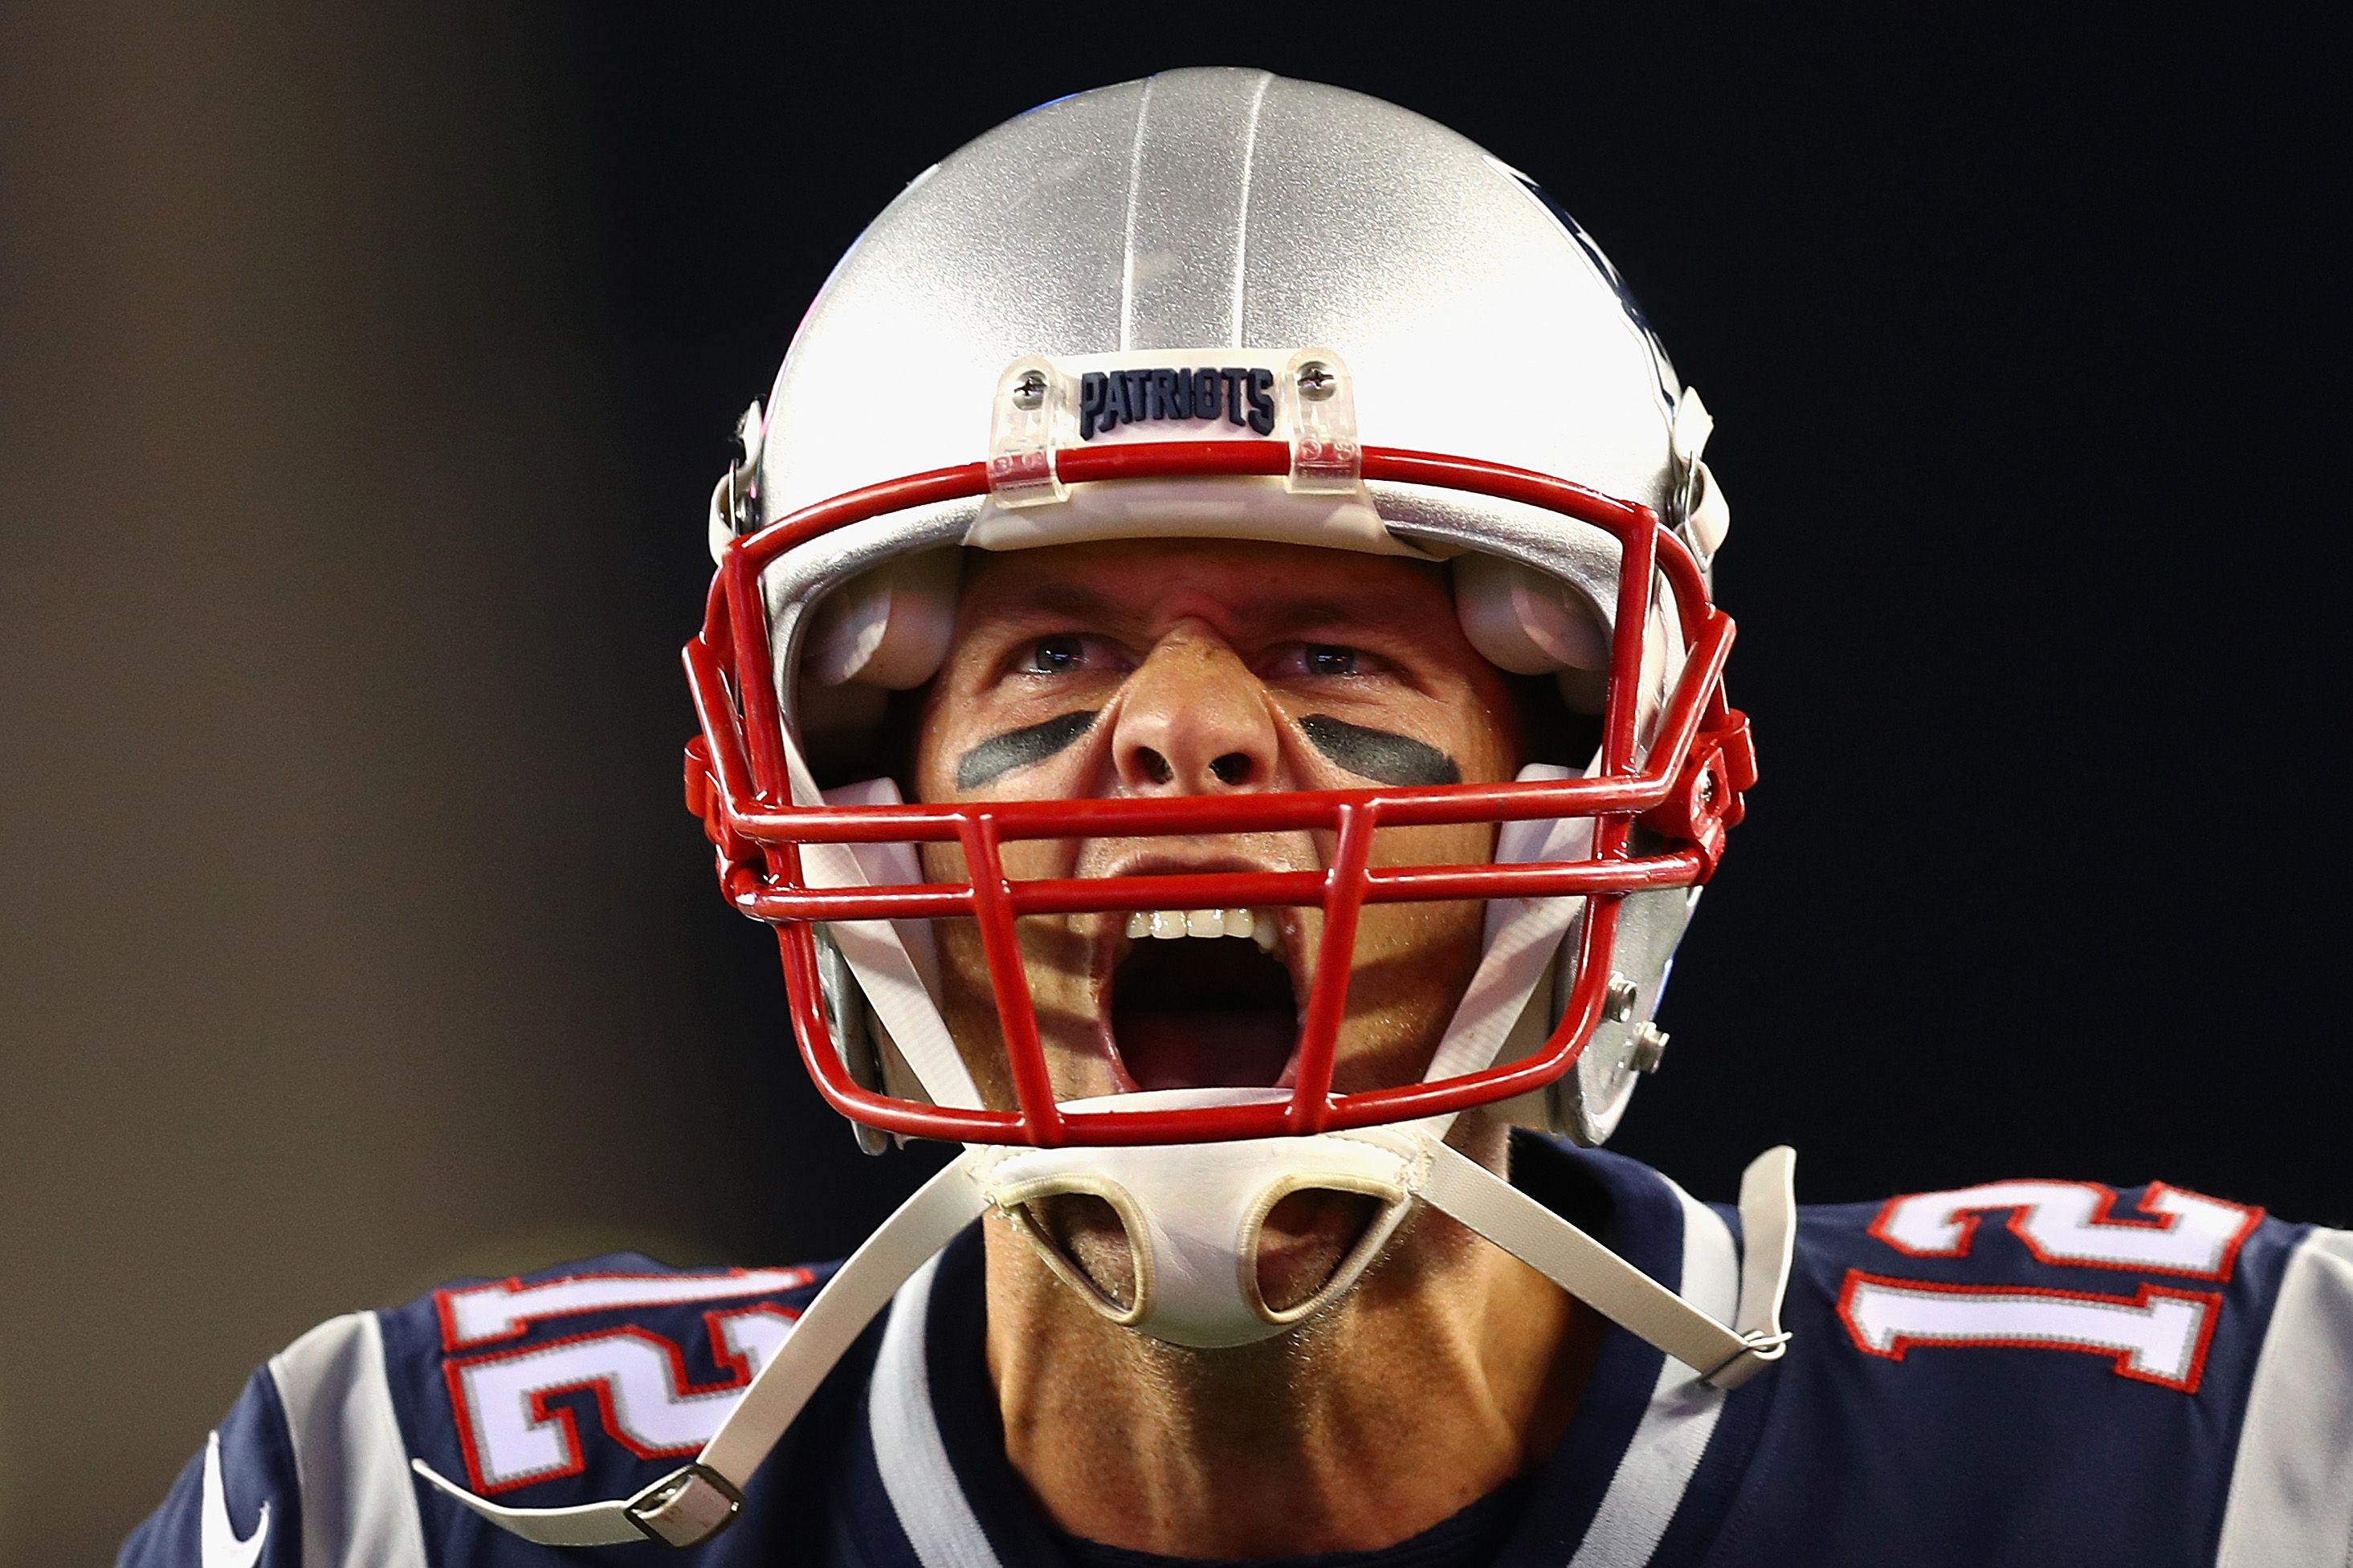 Tom Brady doesn't care about the Pro Bowl, per Brandon Spikes